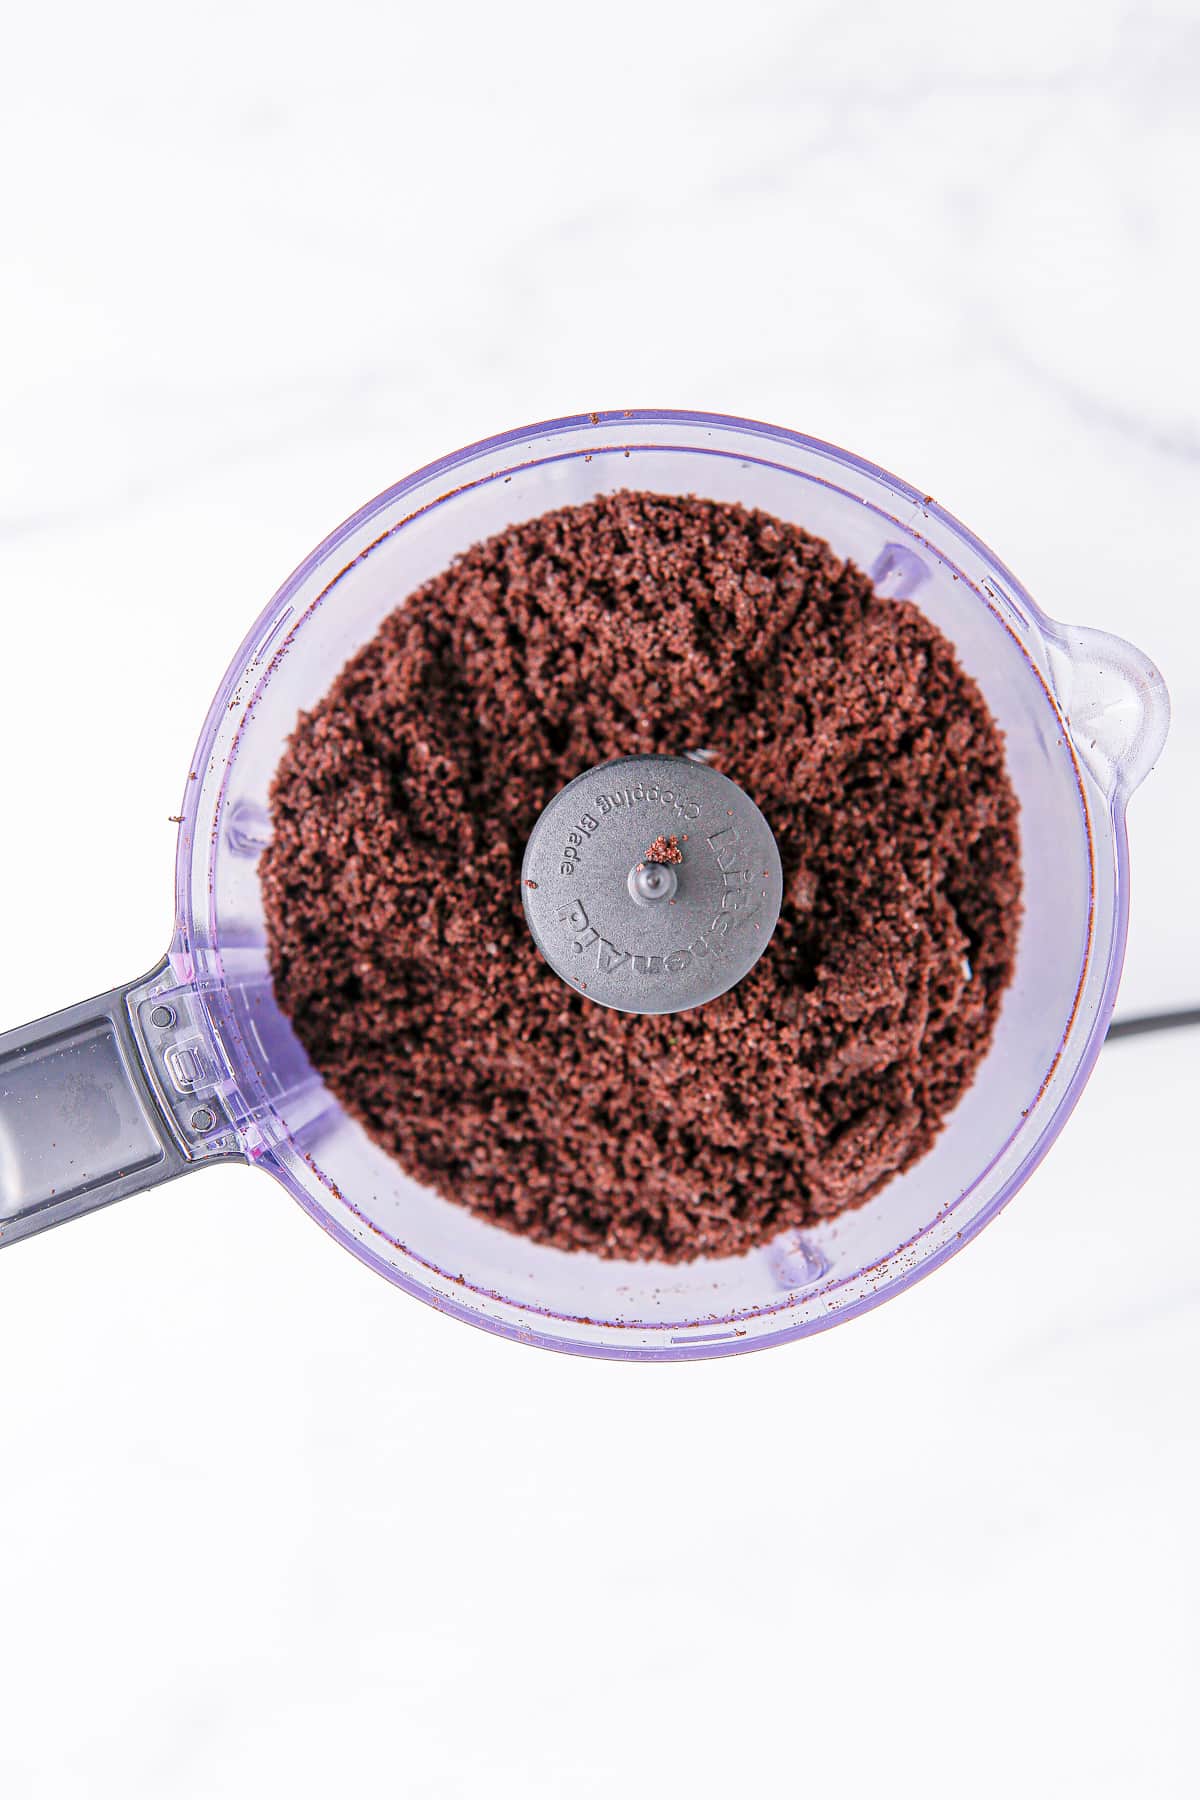 Oreo's turned into crumbs in a food processor from above on a counter.